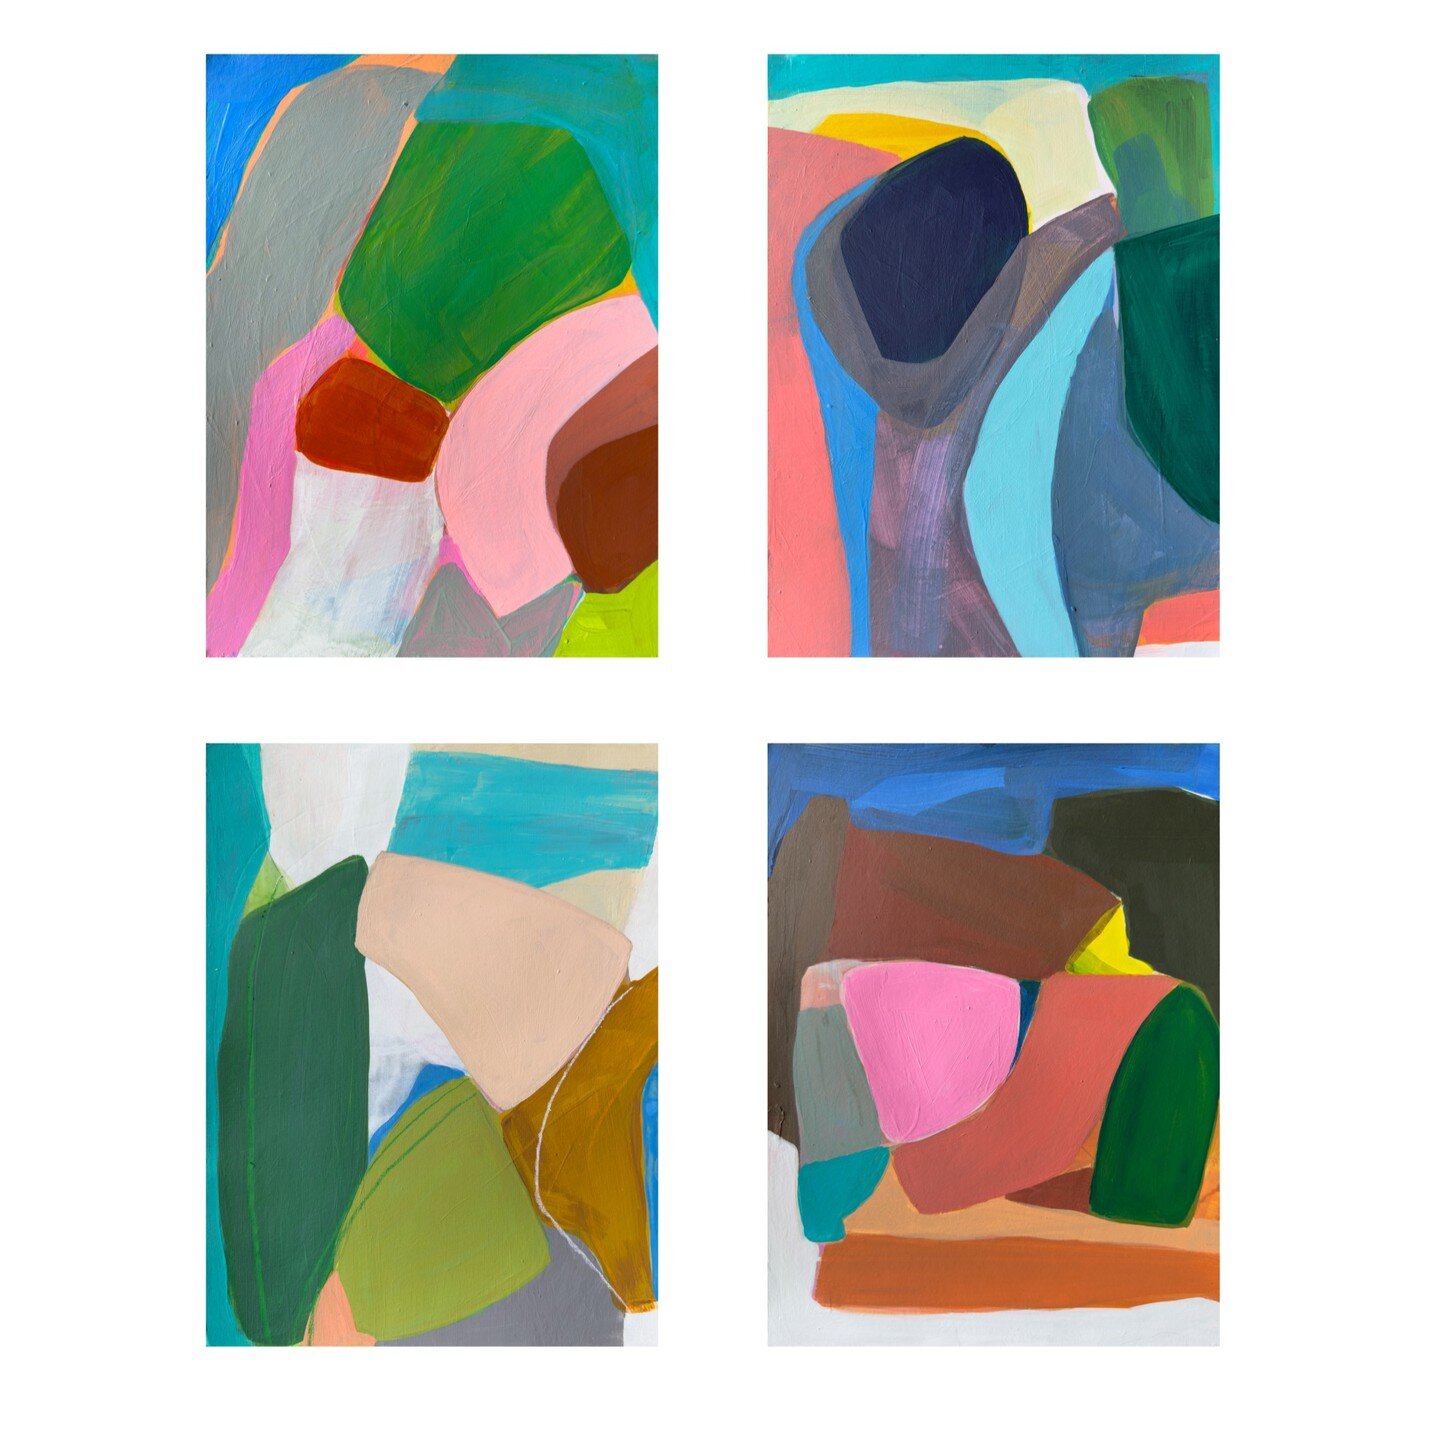 4 new color studies on paper exploring shape, space, and shade:

&bull; Closer
&bull; Breeze
&bull; Connection
&bull; Curious

Find them in my shop ----&gt; https://www.etsy.com/shop/delaMenardiereArt

#abstractart#abstractartwork#abstractartist#abst